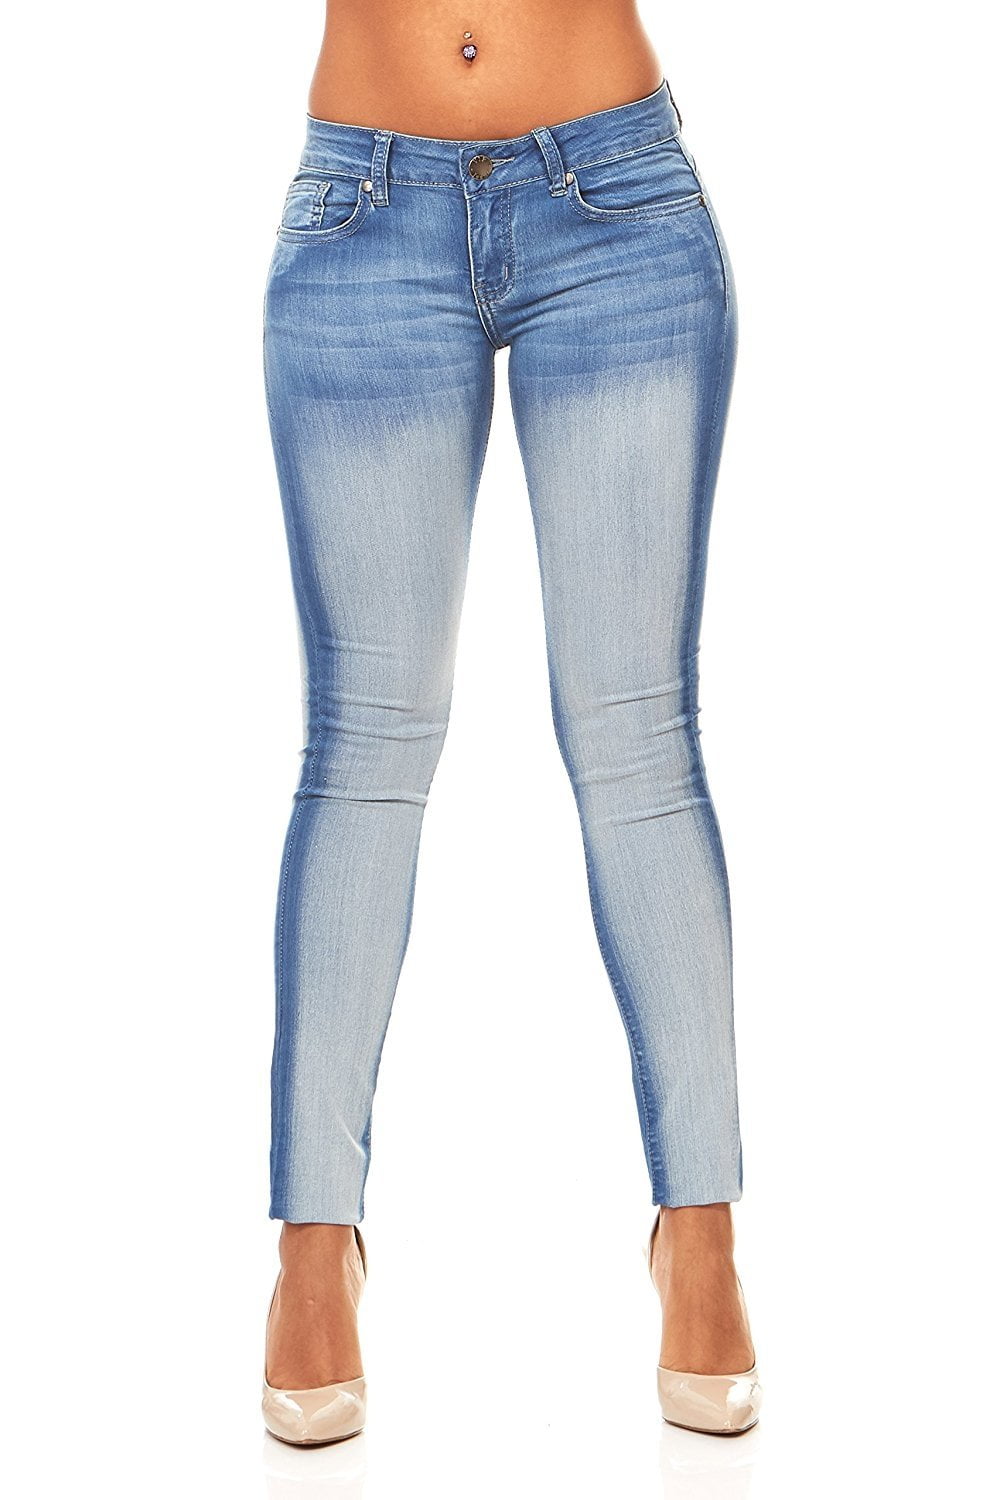 Classic Skinny Jeans for Women Slim Fit Stretch Stone Washed Jeans Juniors  Sizes 7 Electric Blue